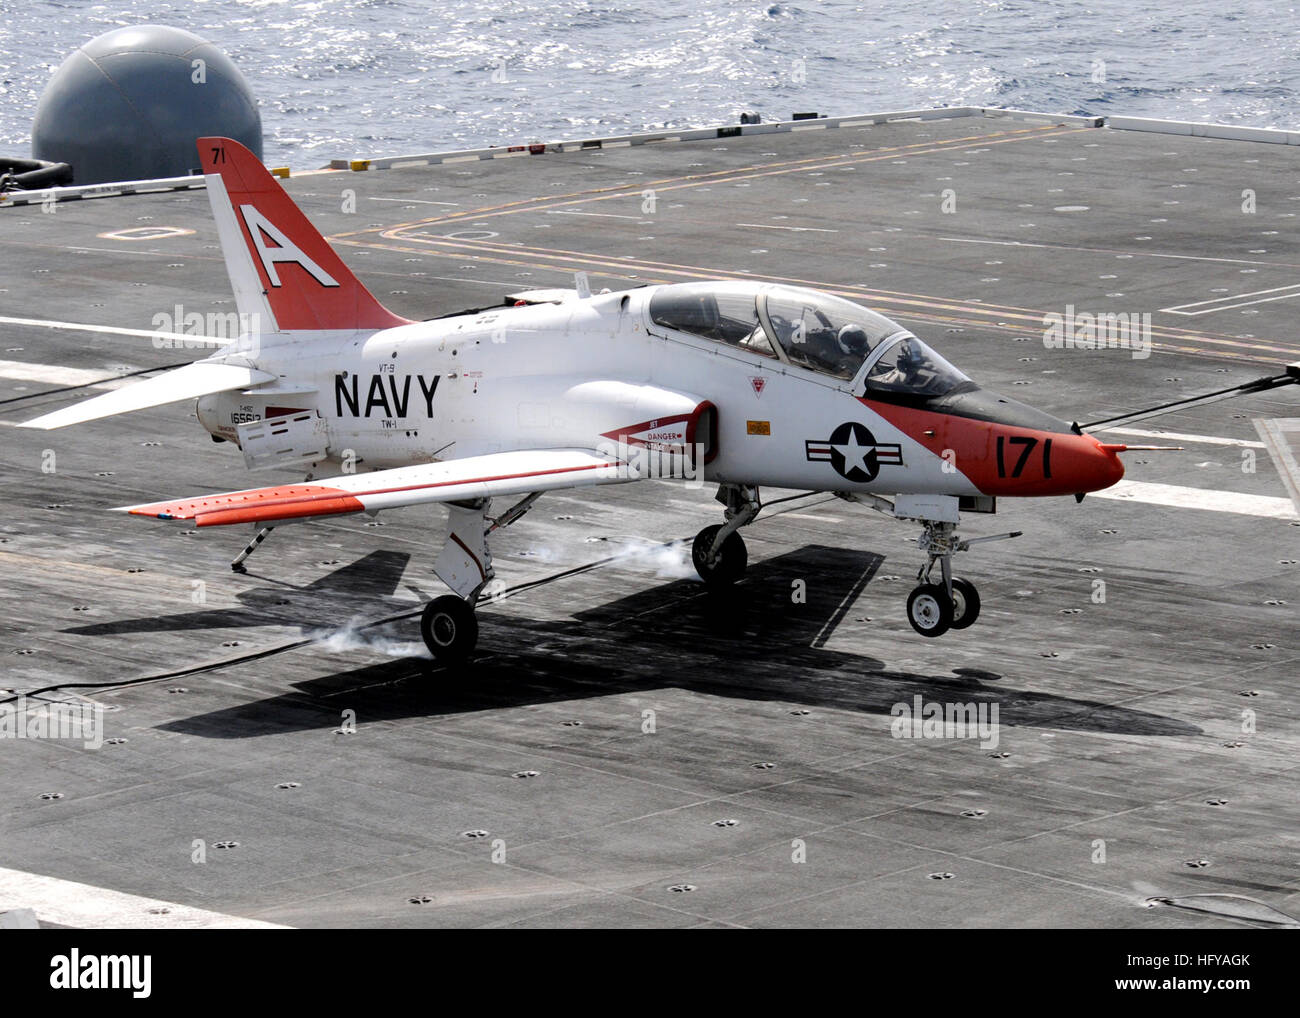 100718-N-6632S-203  ATLANTIC OCEAN (July 18, 2010) A T-45C Goshawk training aircraft assigned to Training Wing (TRAWING) 1 lands aboard the aircraft carrier USS George H.W. Bush (CVN 77). George H.W. Bush is conducting training operations in the Atlantic Ocean. (U.S. Navy photo by Mass Communication Specialist Seaman Kevin J. Steinberg/Released) US Navy 100718-N-6632S-203 A T-45C Goshawk training aircraft assigned to Training Wing (TRAWING) 1 lands aboard the aircraft carrier USS George H.W. Bush (CVN 77) Stock Photo